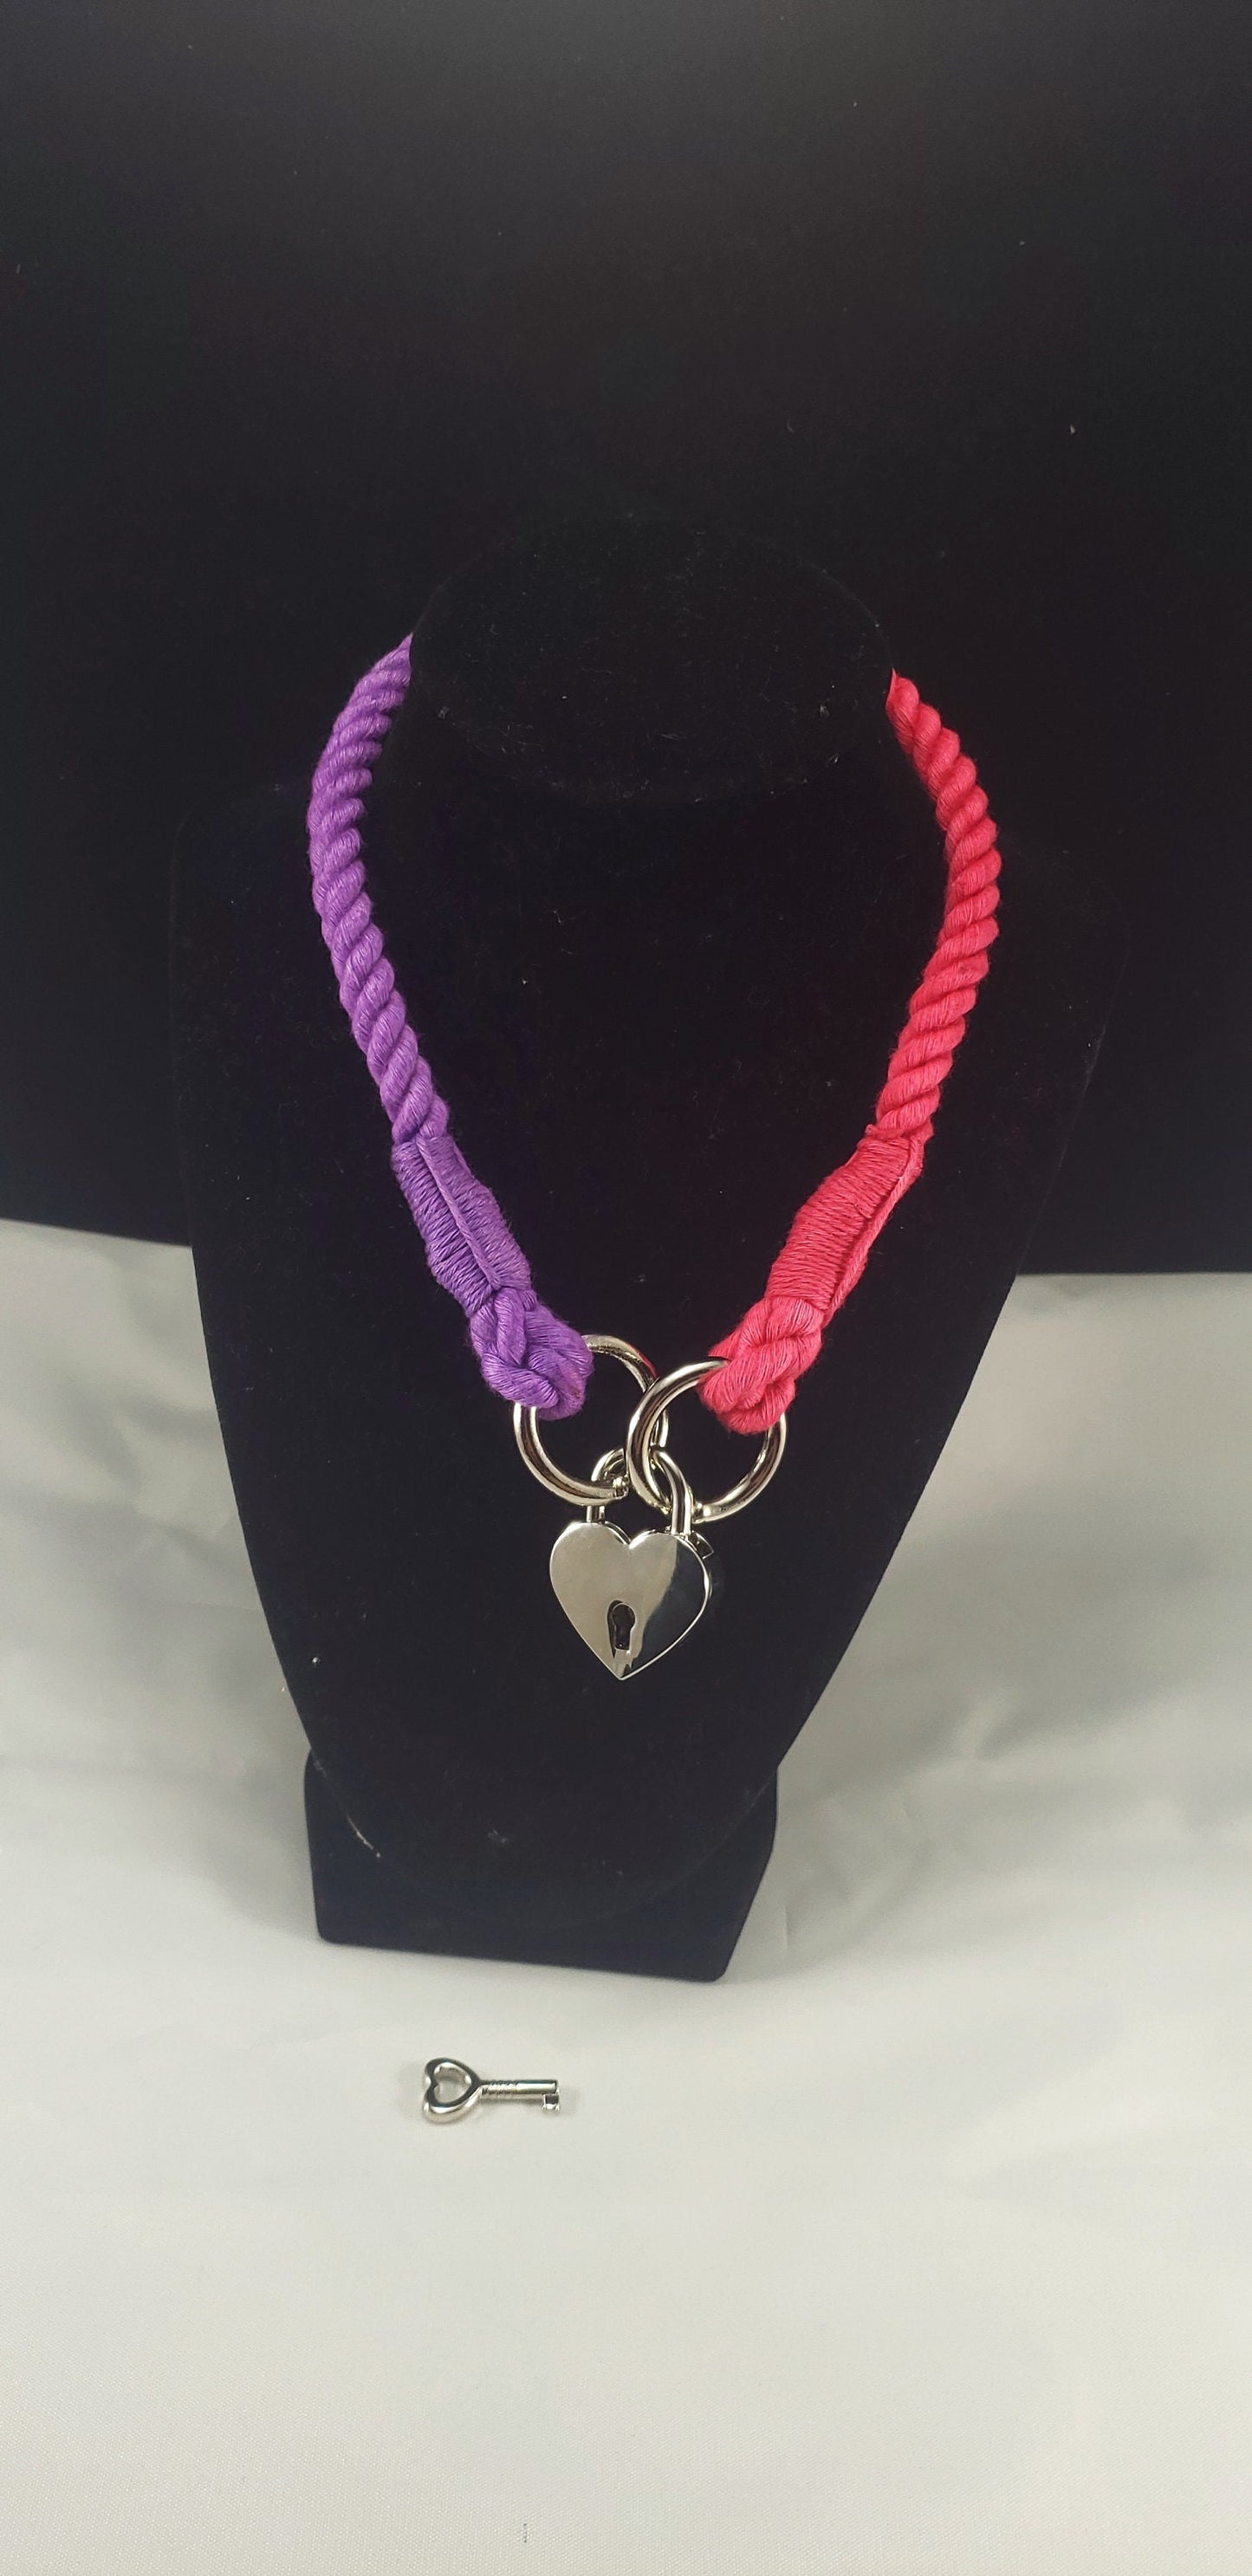 Purple and Red Pet Play Rope Heart Locking Collar - Submissive Cotton Collar | Novelty Collar Accessory for Roleplay